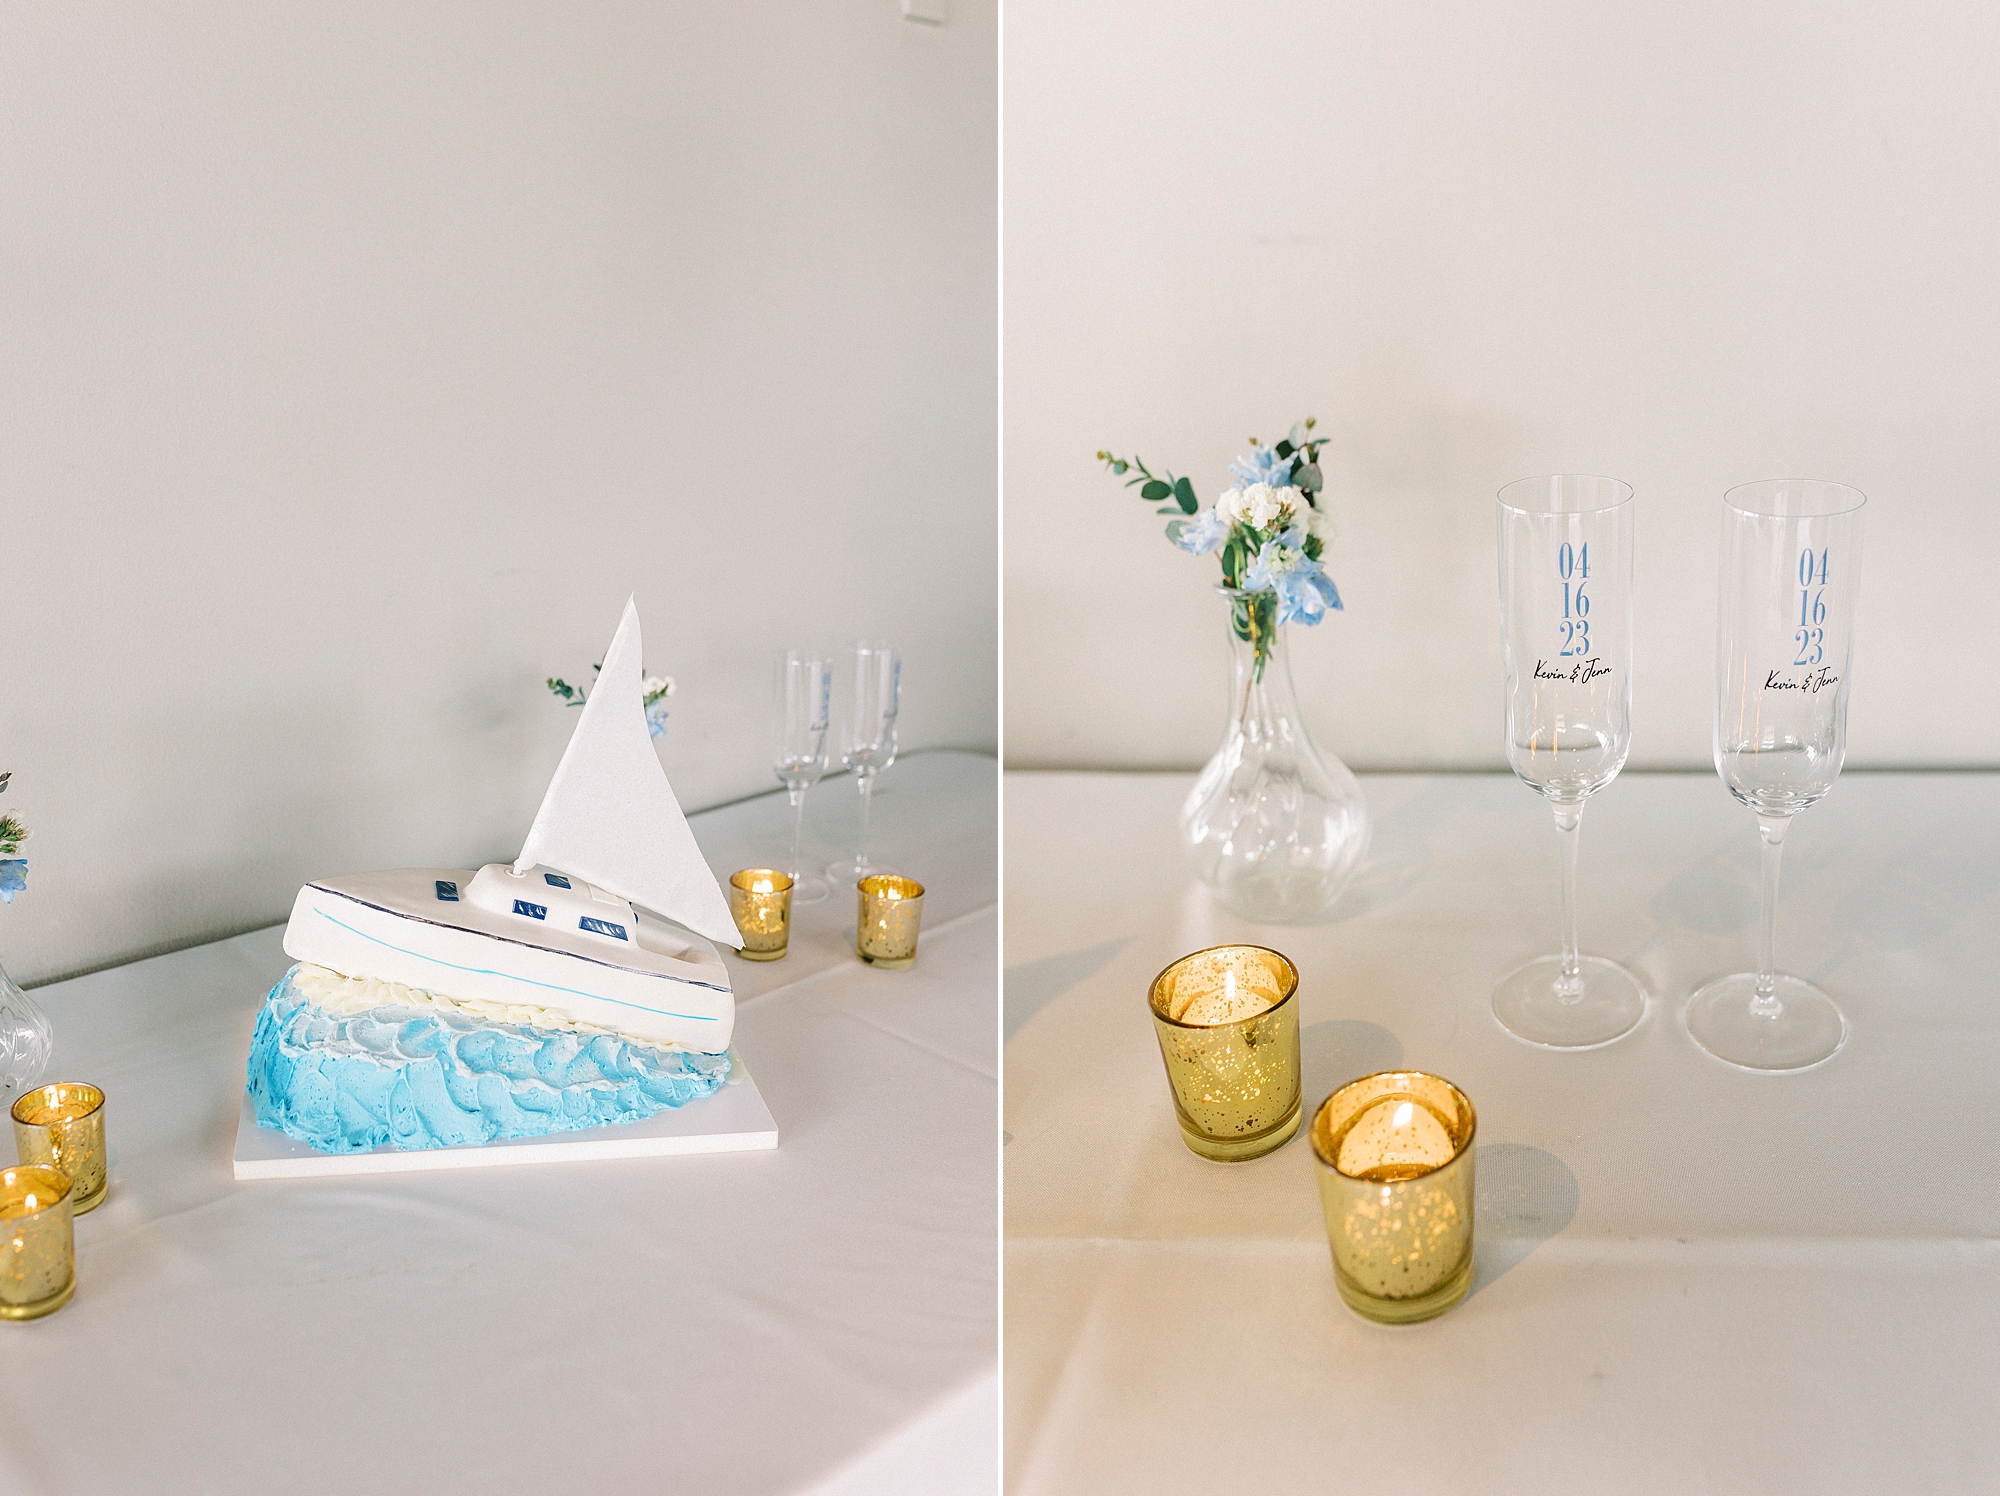 wedding cake in shape of boat next to gold candles for reception at the Terrace at Cedar Hill